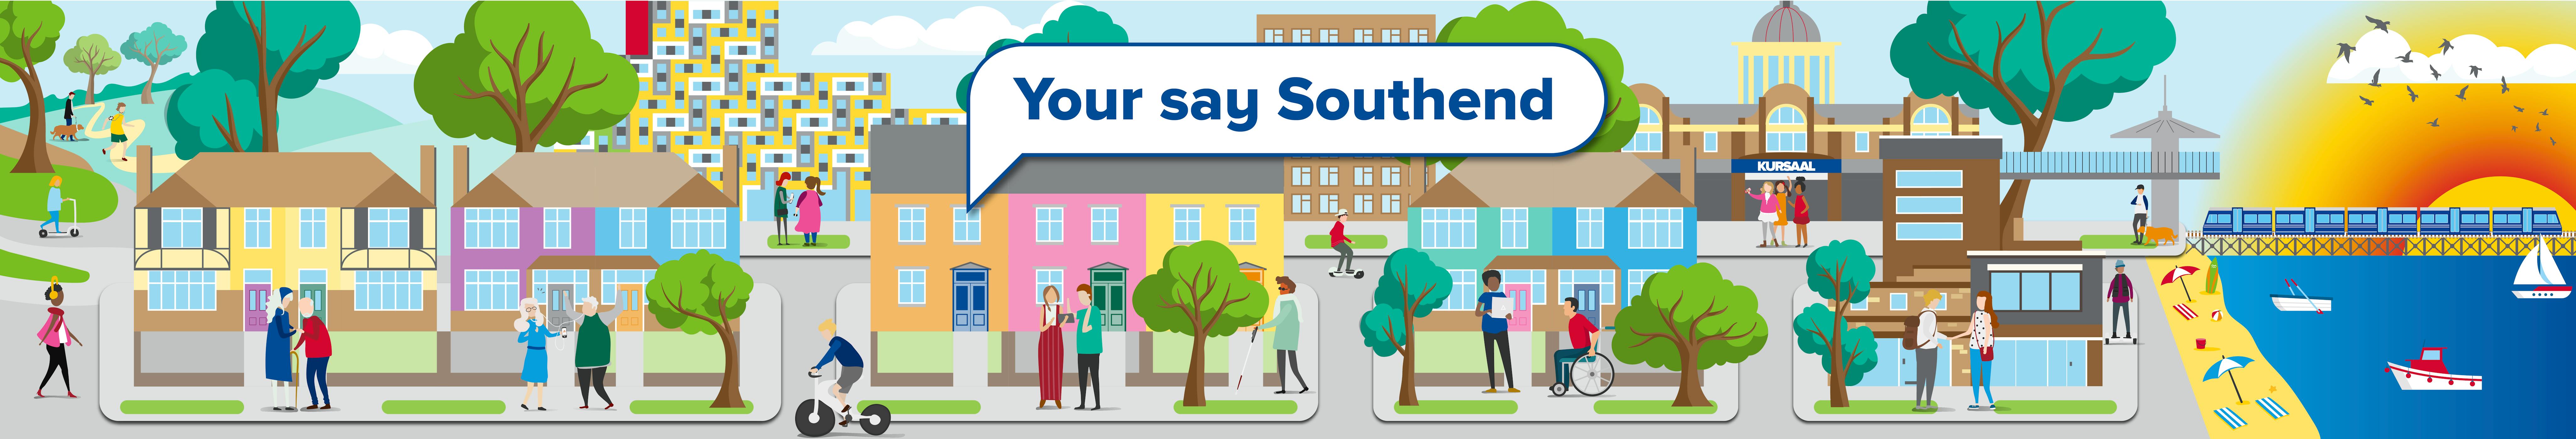 your say southend image 